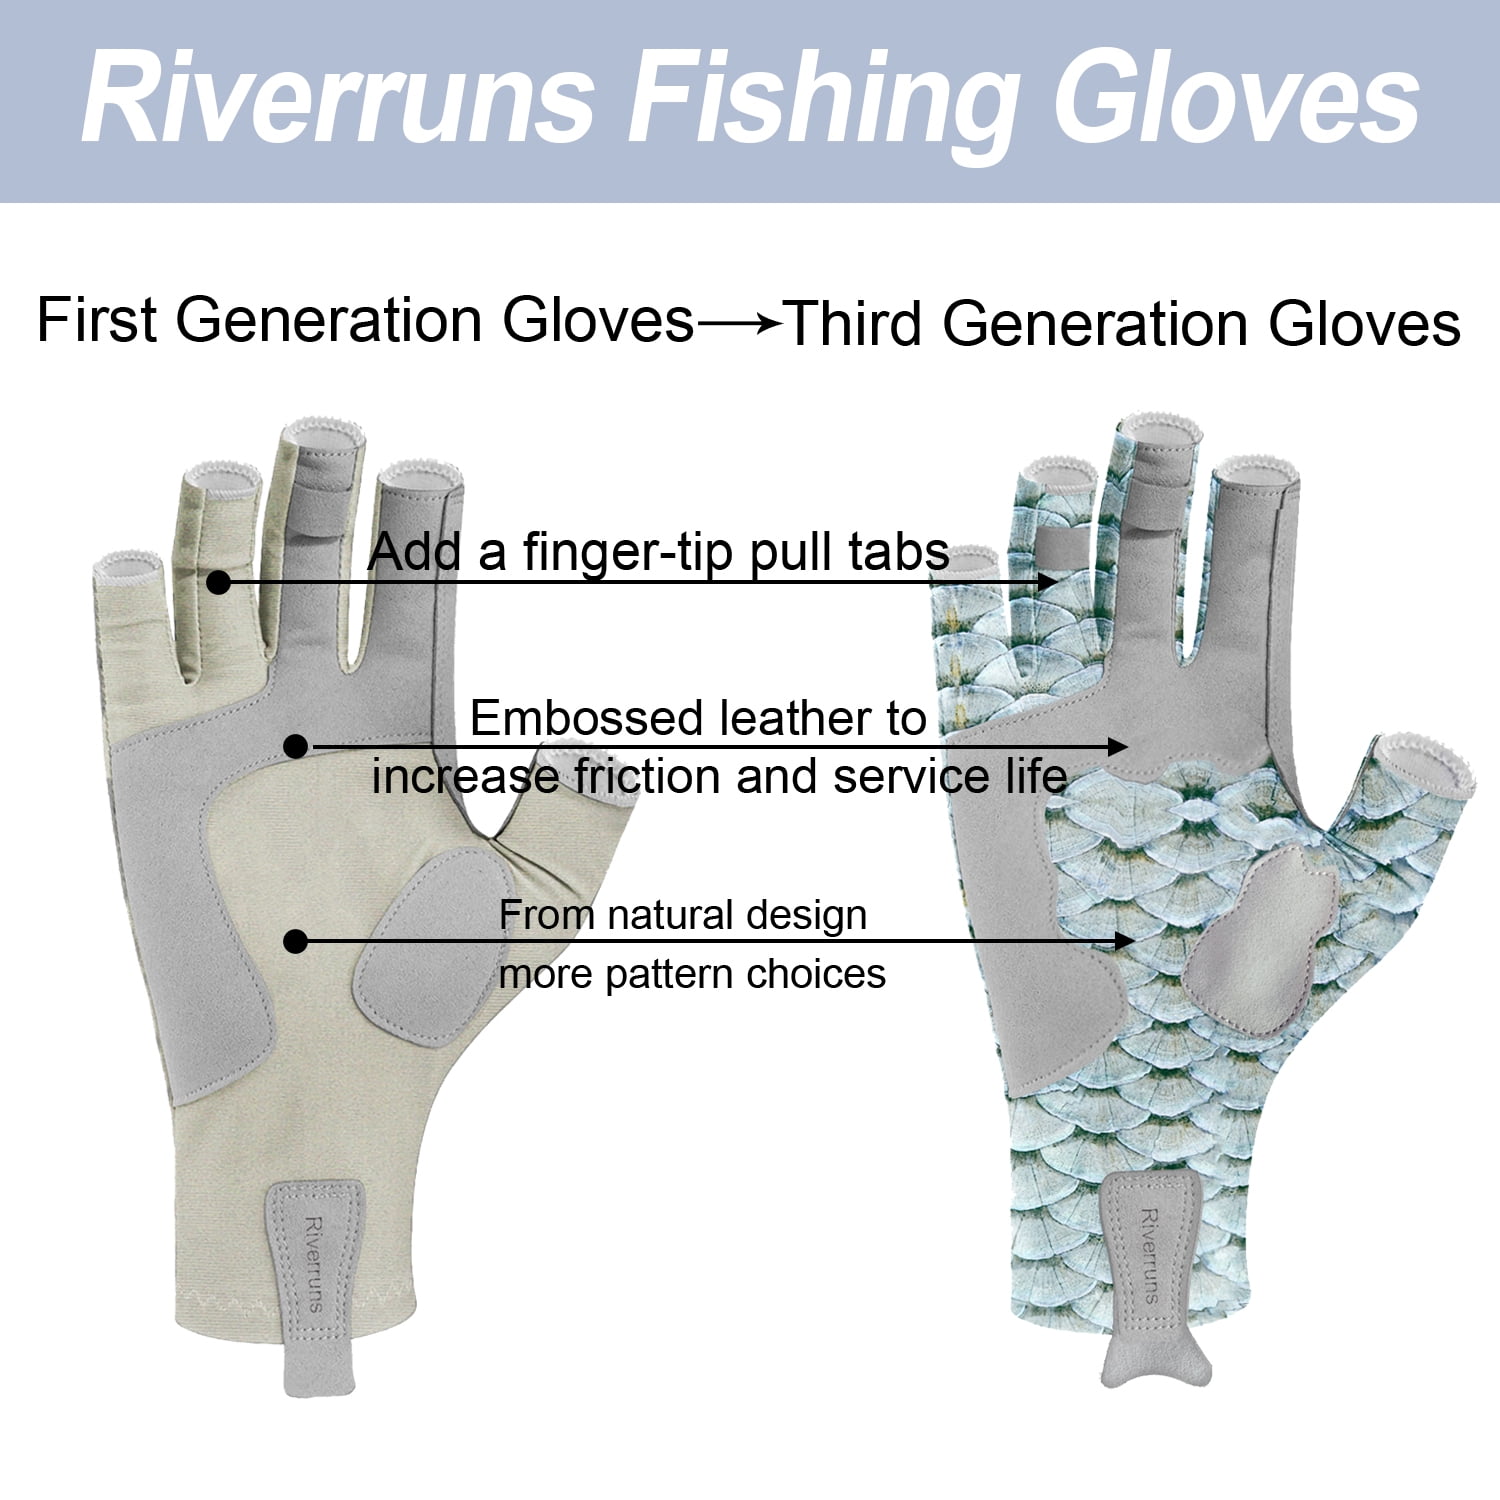 Riverruns UPF 50+ Sun Protection Fingerless Fishing Gloves and Neck Gaiter Cmobo for Men and Women Fishing Kayaking Hiking Boating Cycling and Driving.